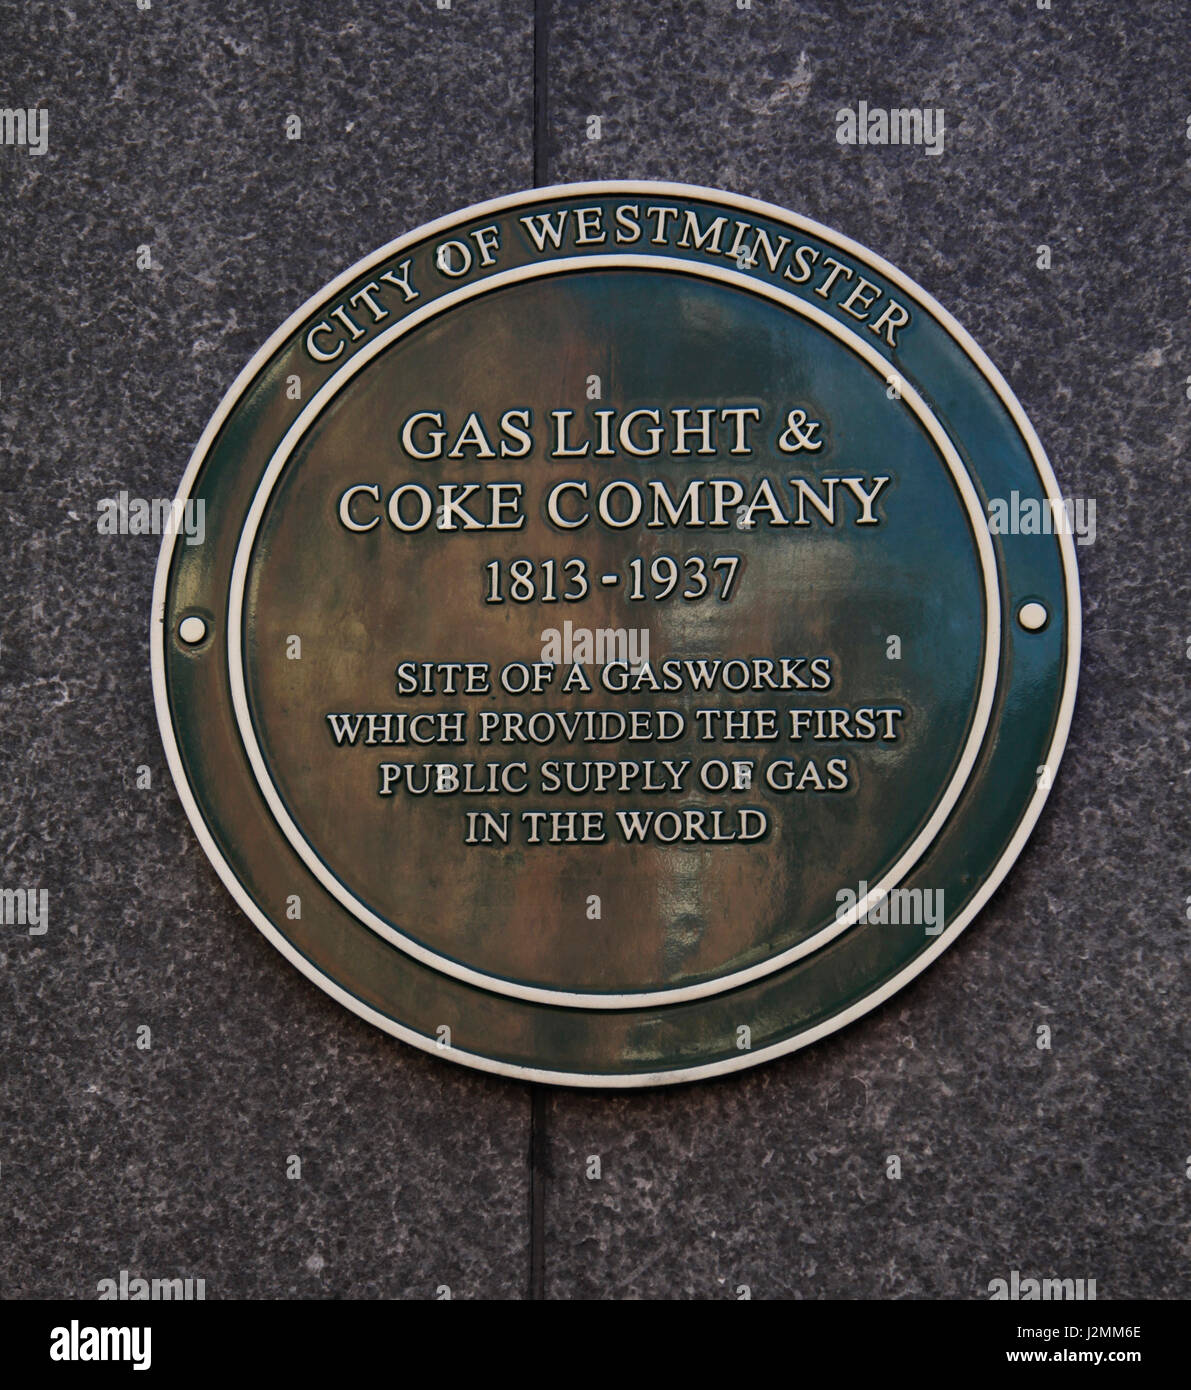 Site Plaque of the first  Public Gasworks supplying public gas in the world. Westminster London England. Stock Photo